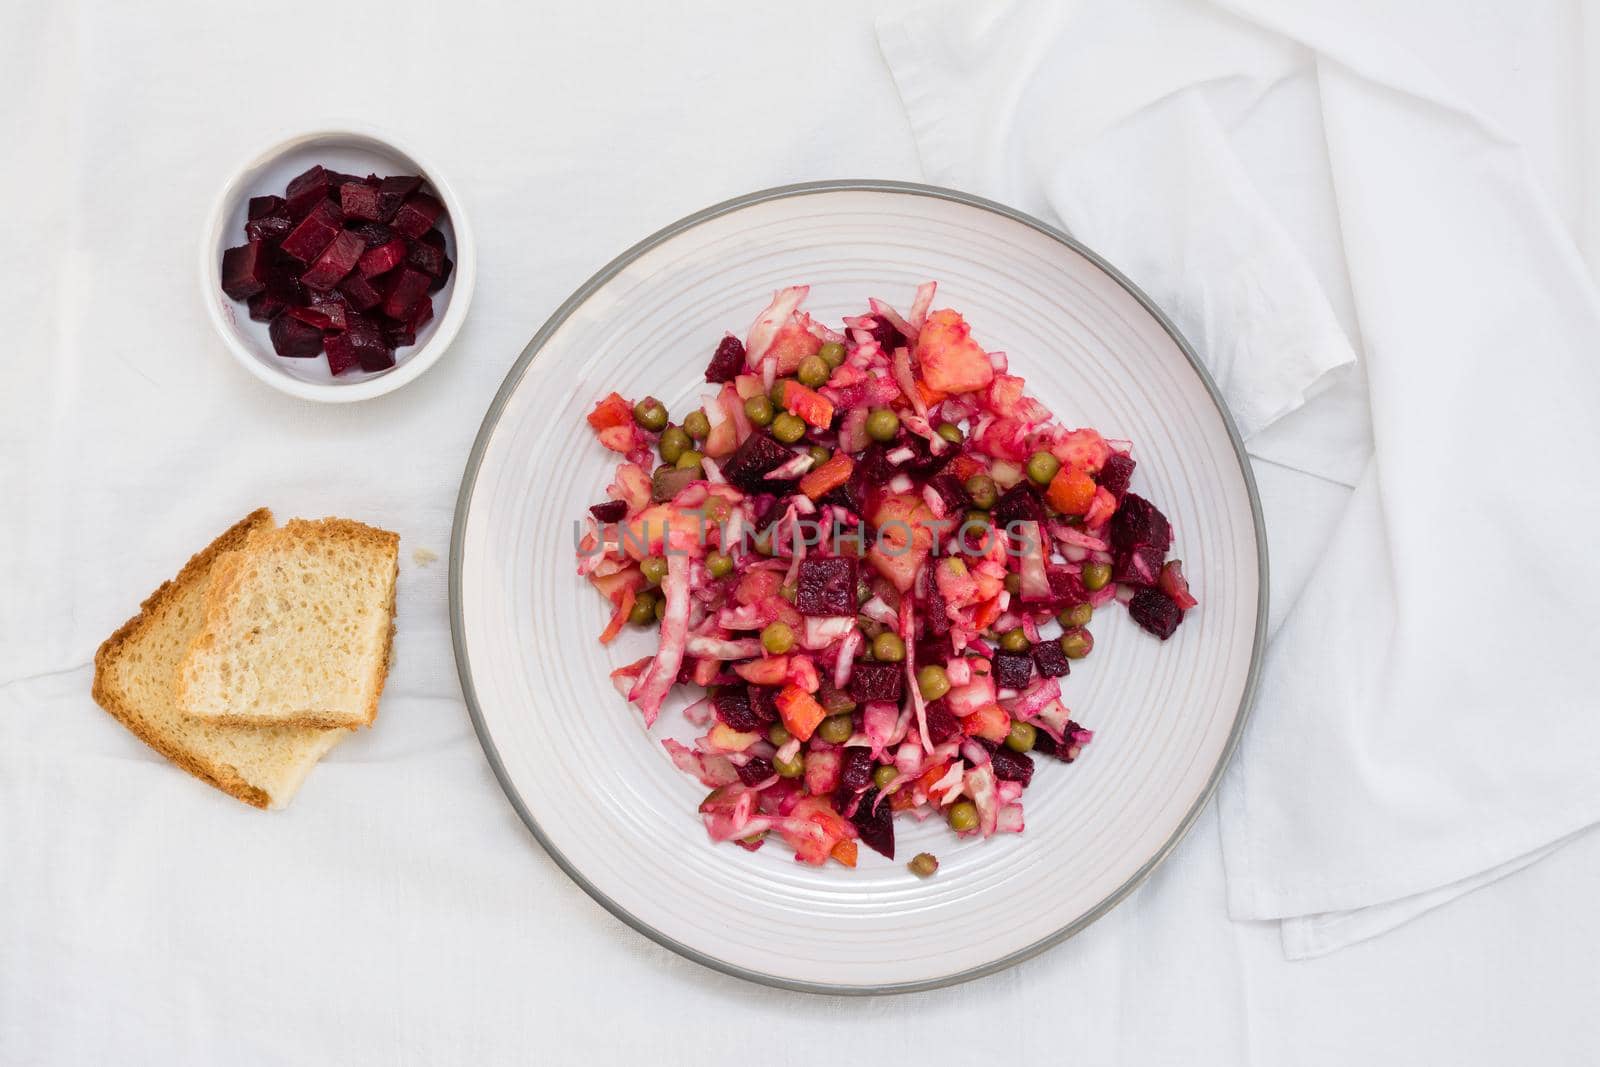 Russian traditional salad with vegetables - vinaigrette on a plate, bread and a bowl of beets on a table on a cloth. Top view by Aleruana